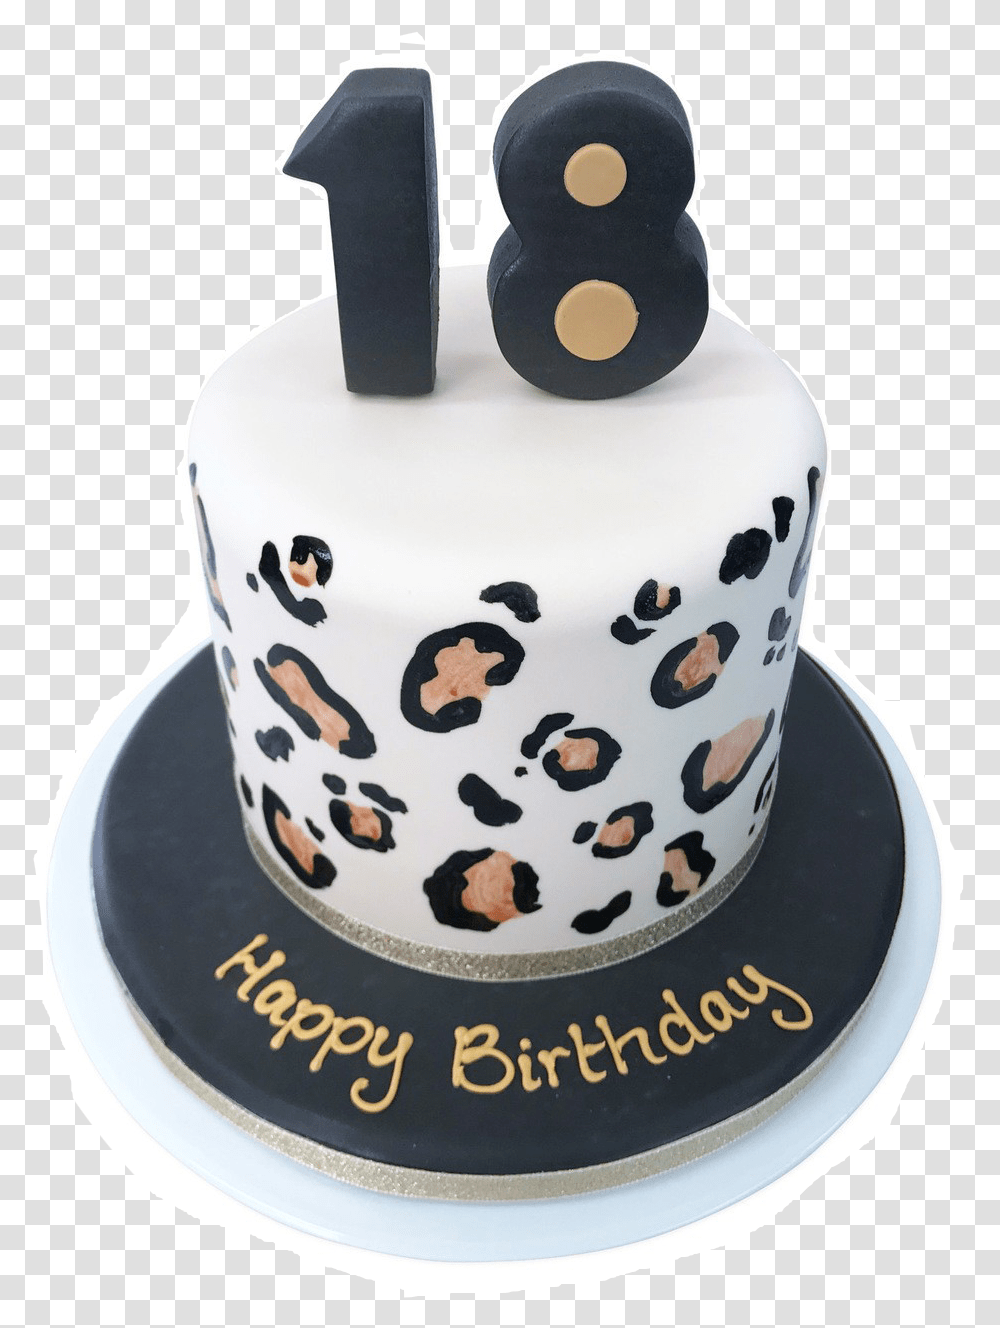 Birthday Cakes Free Background Leopard Print Drip Cake, Dessert, Food, Dish, Meal Transparent Png